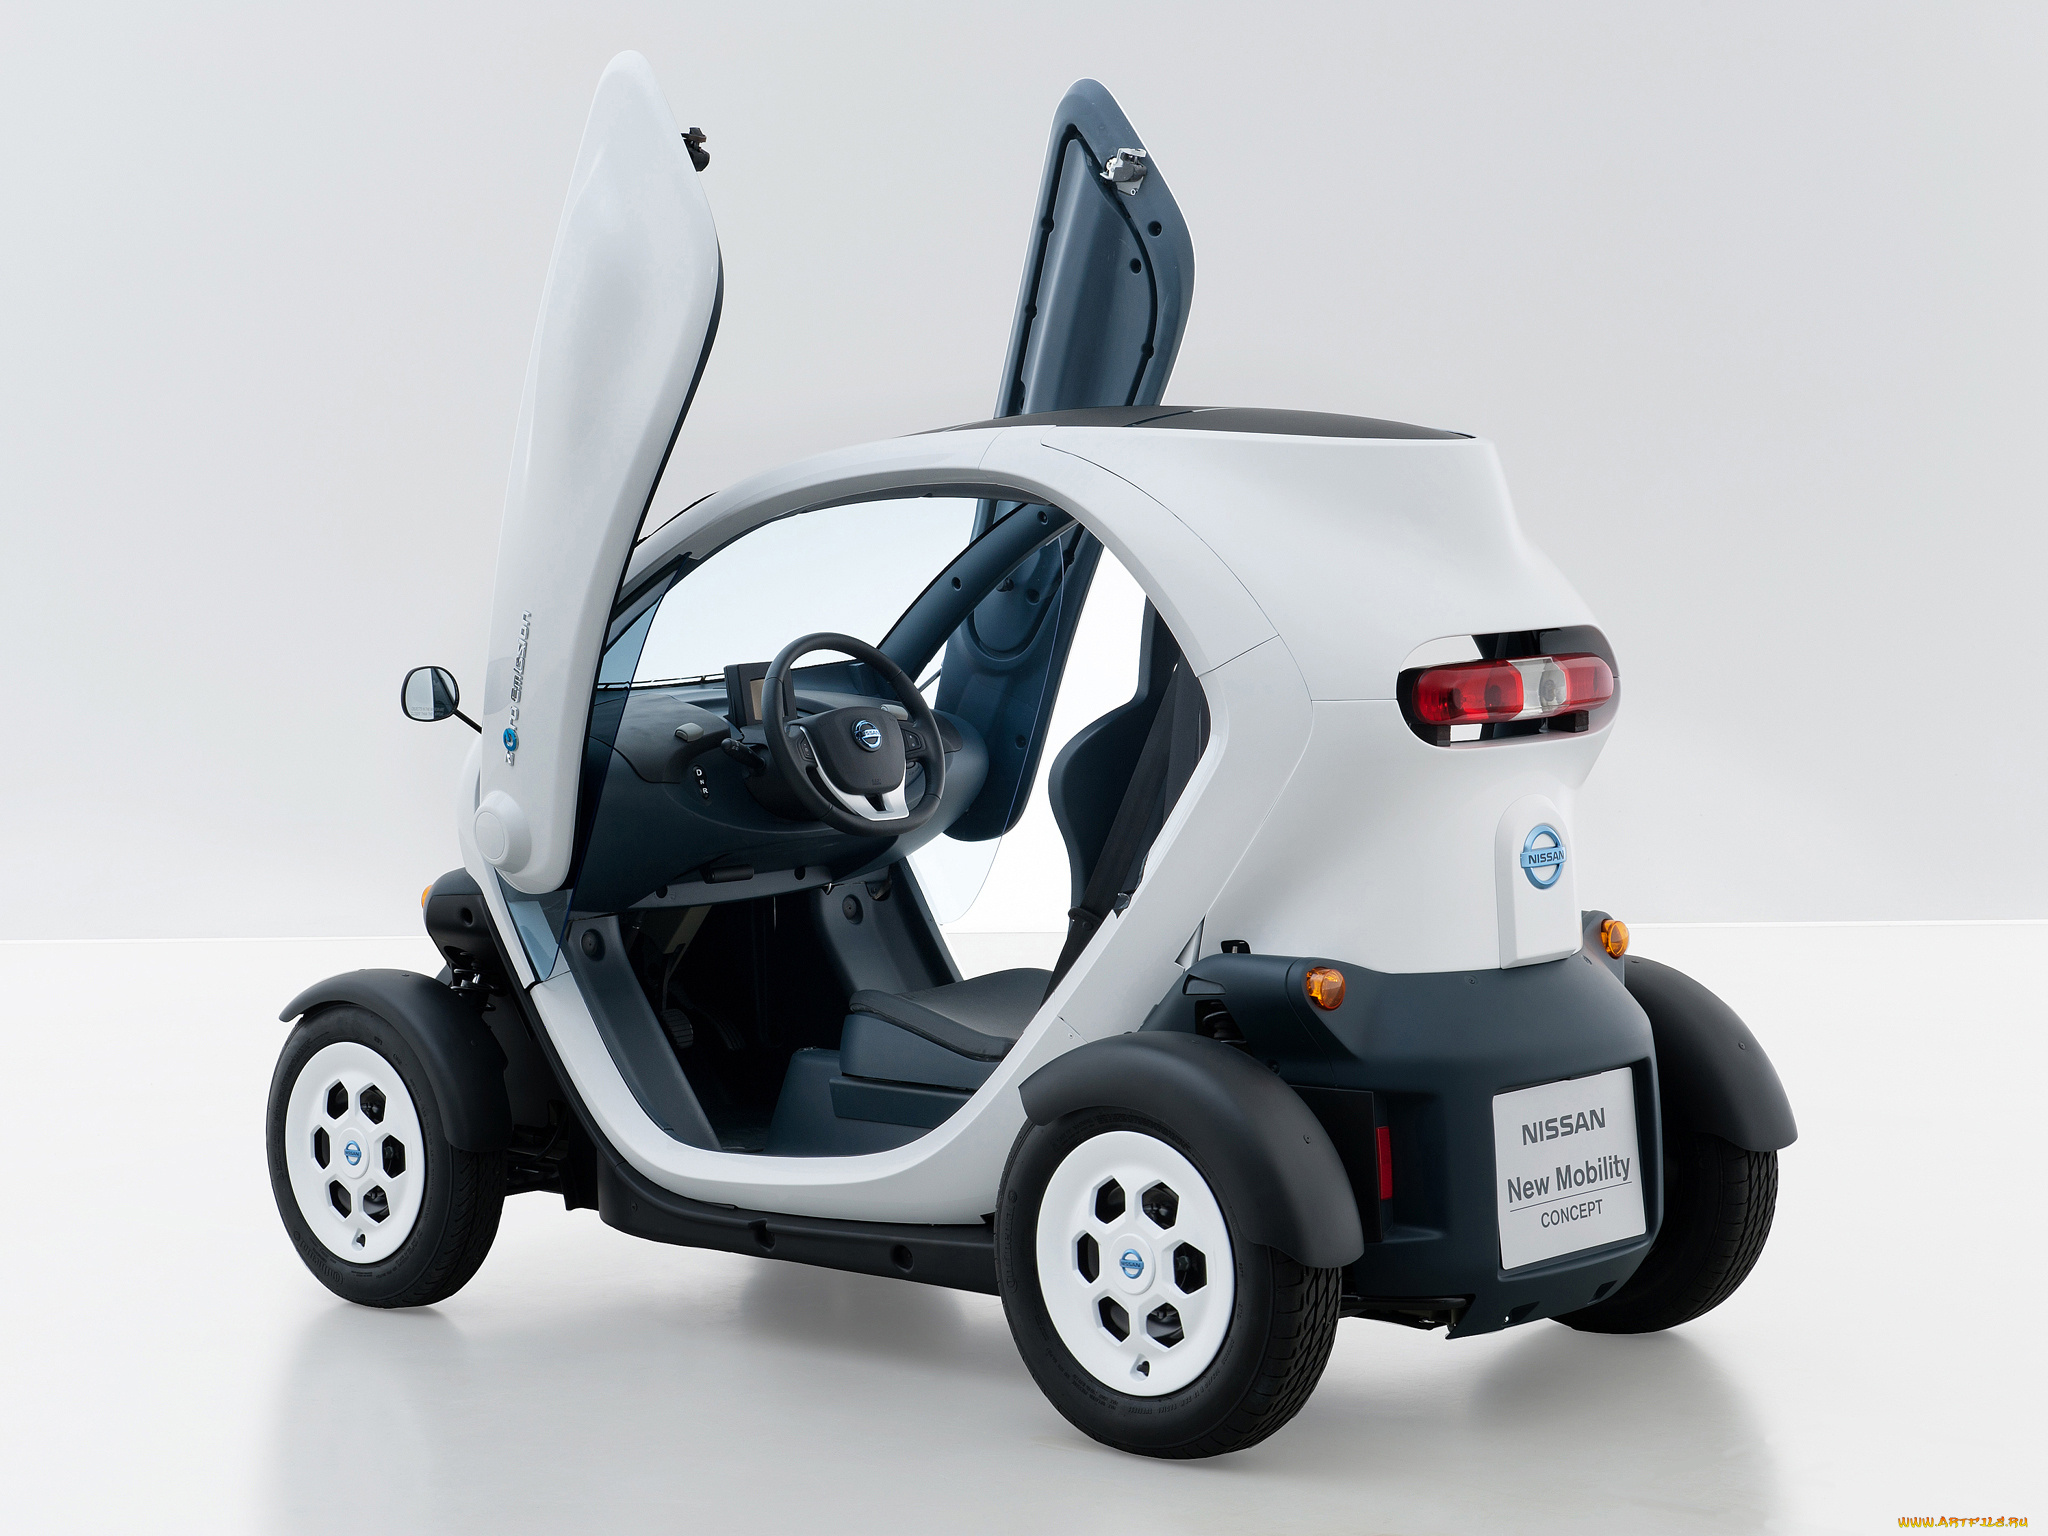 nissan, new, mobility, concept, 2011, автомобили, nissan, datsun, new, mobility, concept, 2011